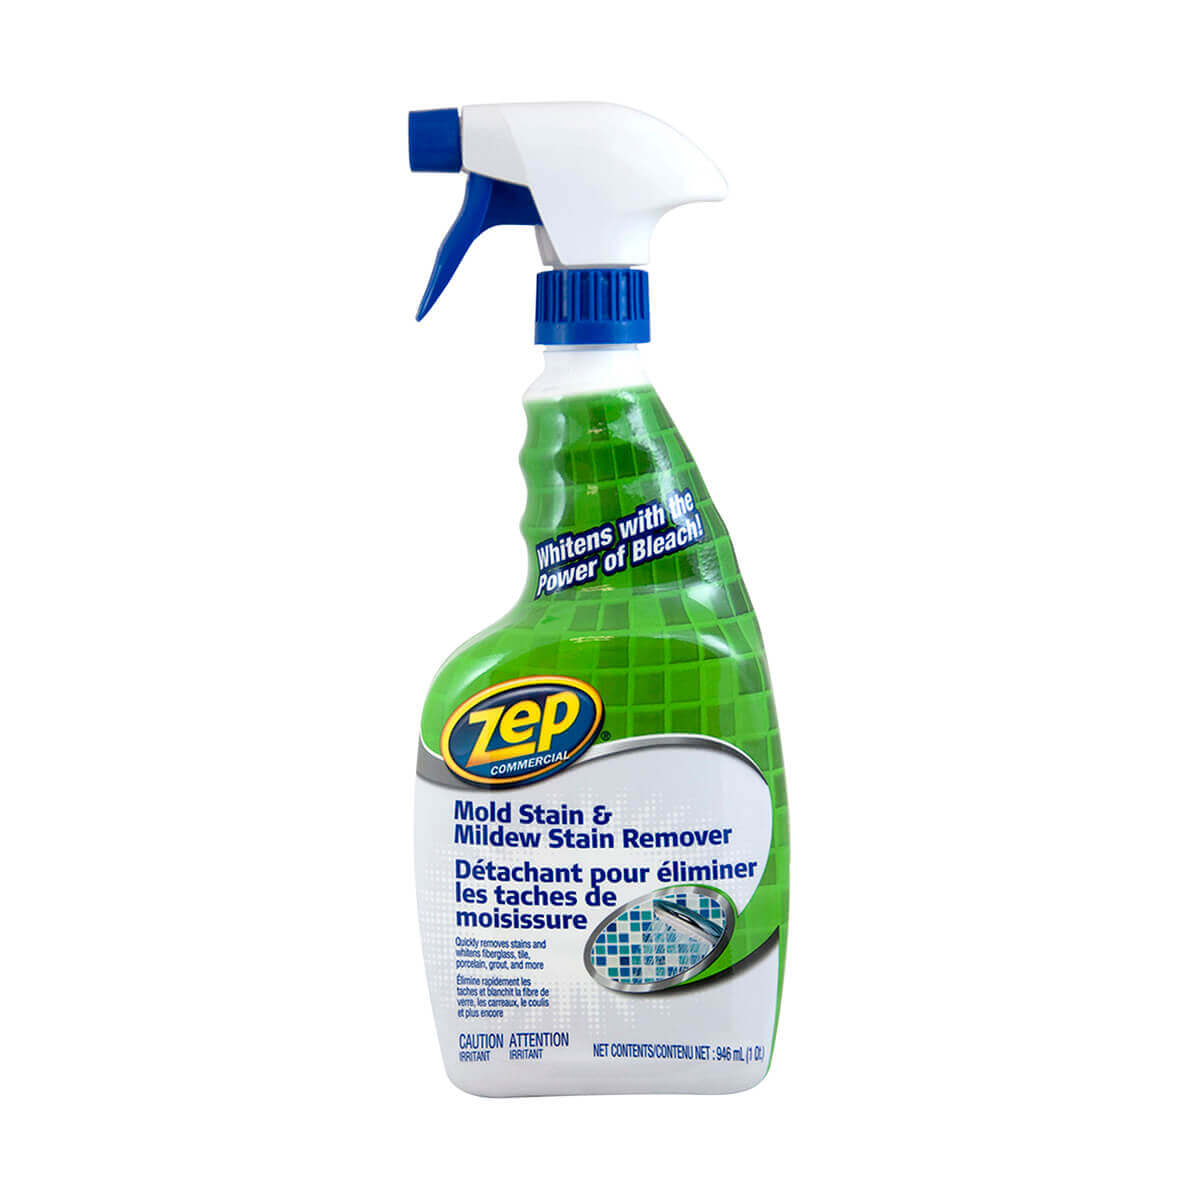 Zep Commercial Mildew Stain Remover - 946 ml